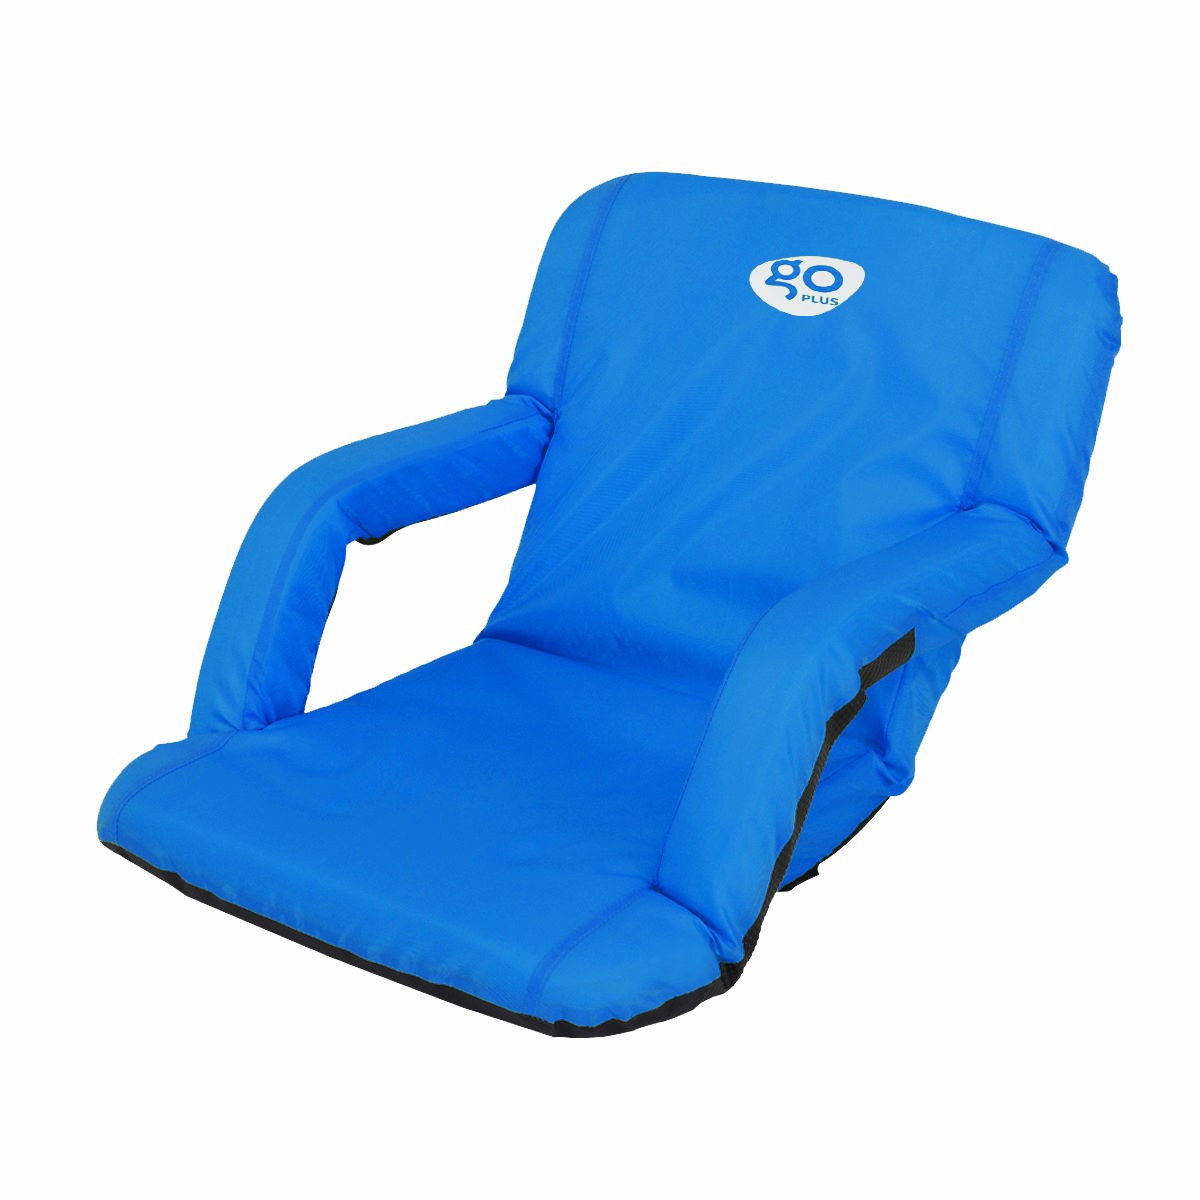 Reclining Seat Padded Cushion Camping Sport Chair